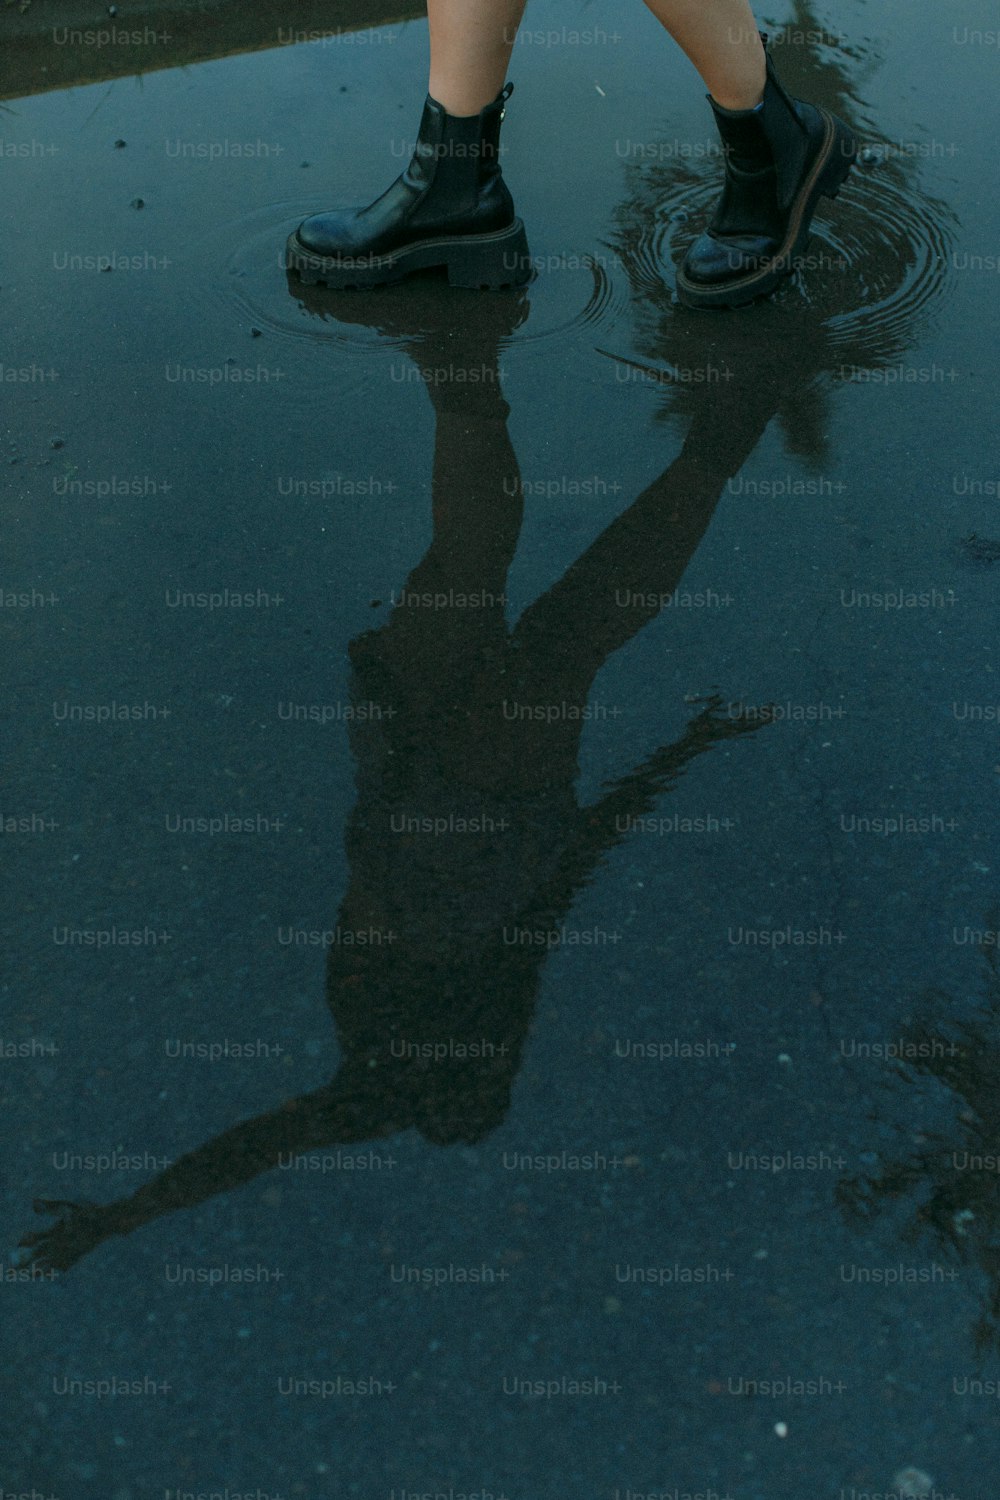 a person standing in a puddle holding an umbrella